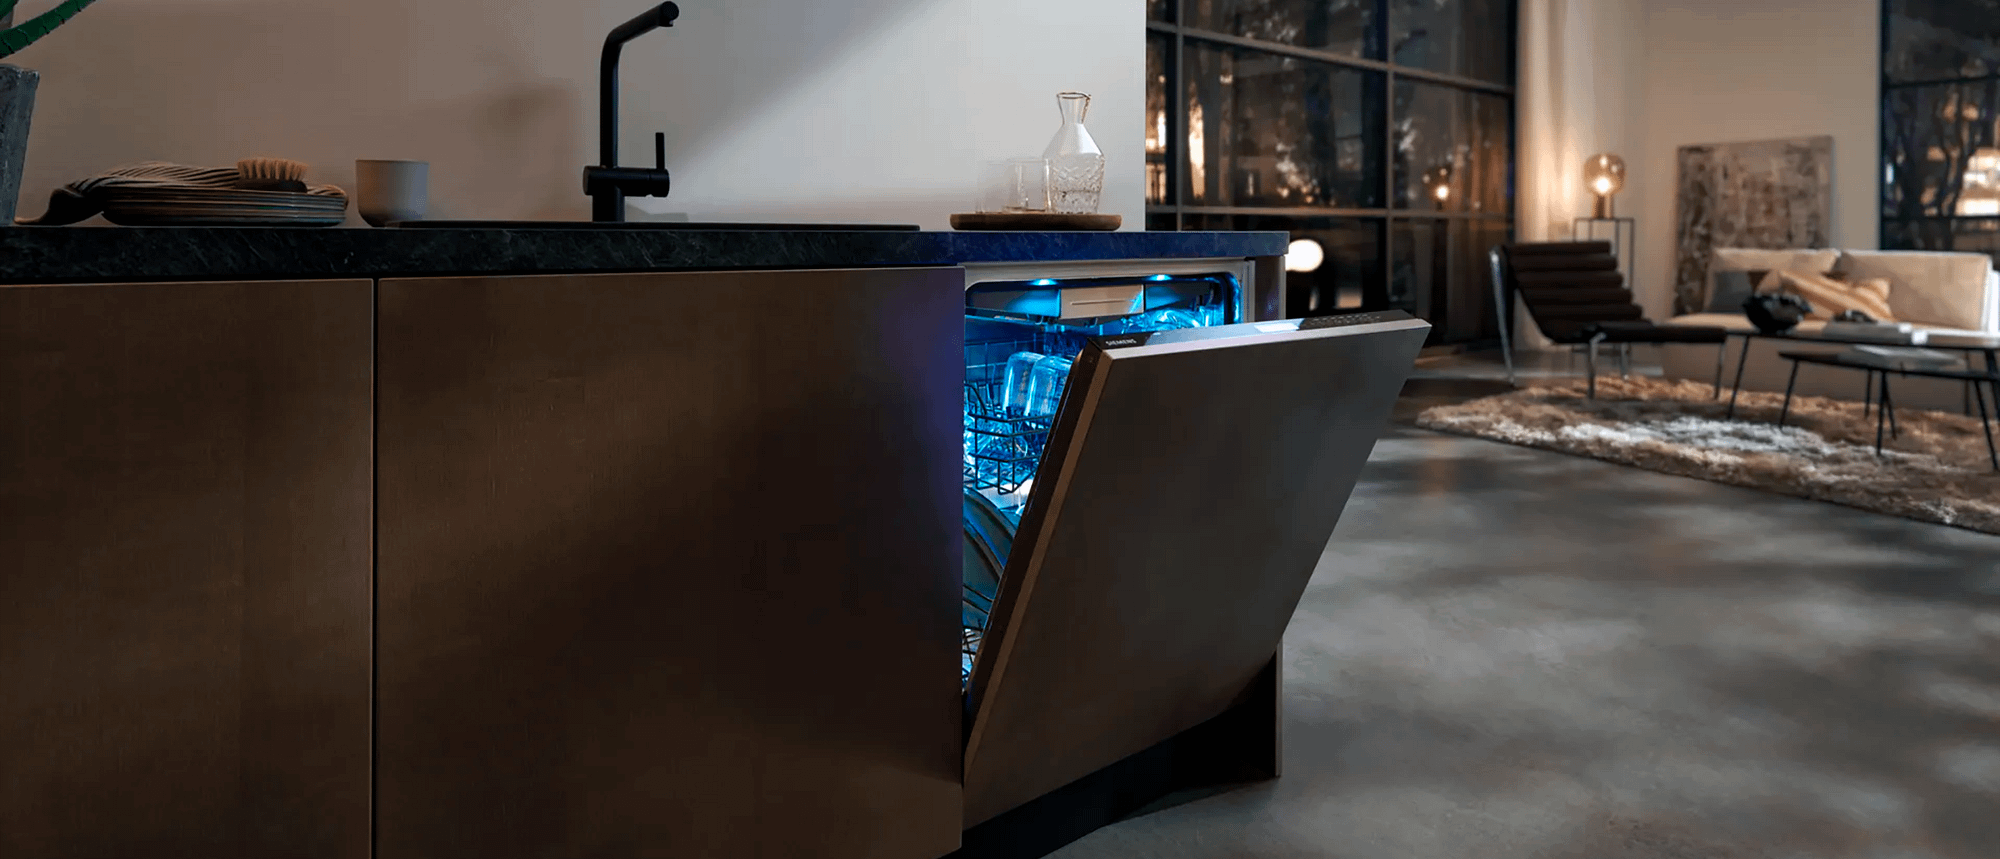 Kitchen with dimmed down lights, with a slighlty opened dishwasher emitted a blue light.